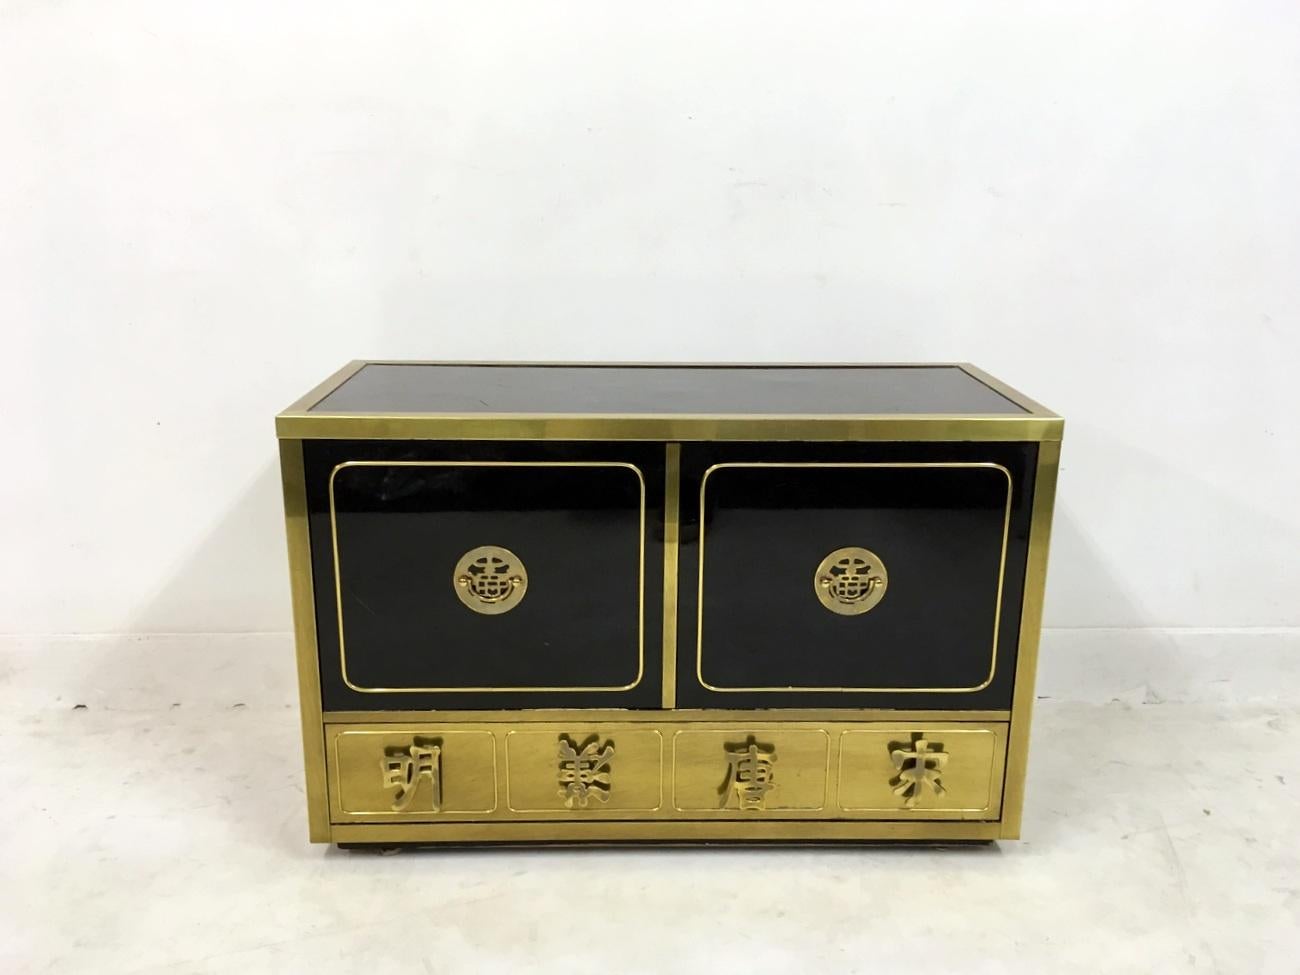 Chinoiserie Vintage 1970s Black Lacquer and Brass Cabinet by Mastercraft